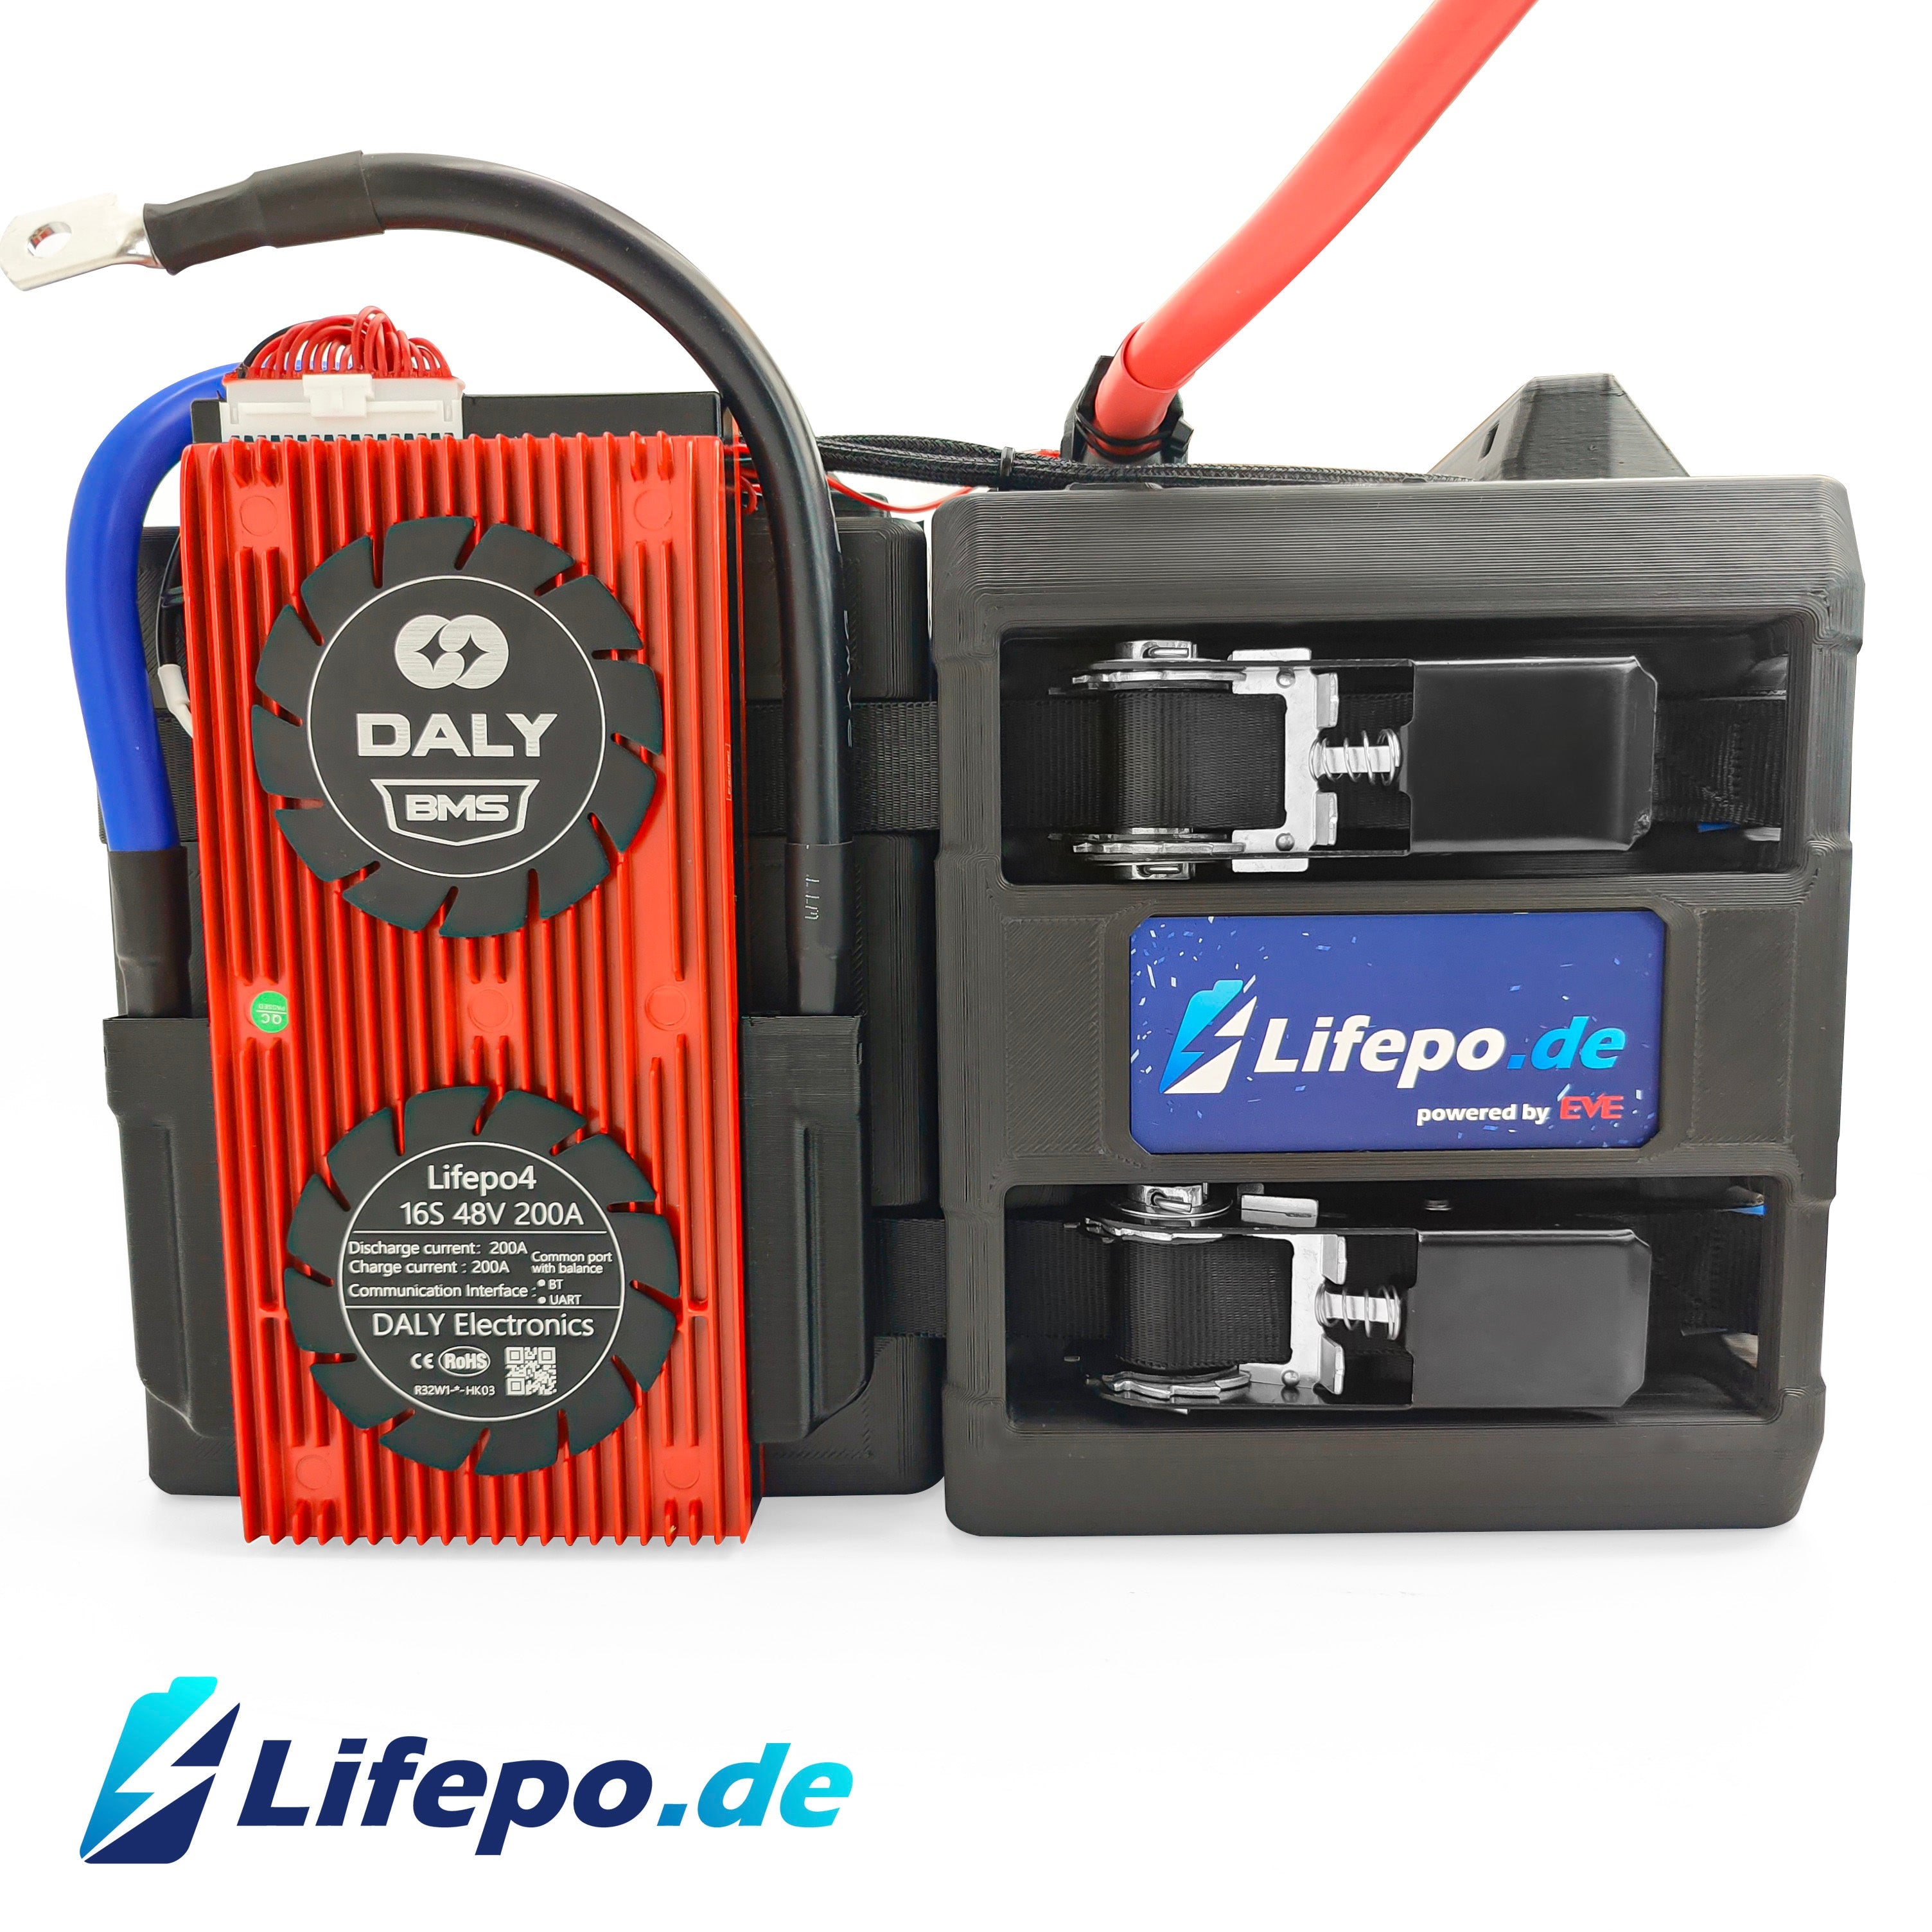 0% VAT 48v 280Ah Lifepo4 battery system with EVE Grade A+ 15.2kWh